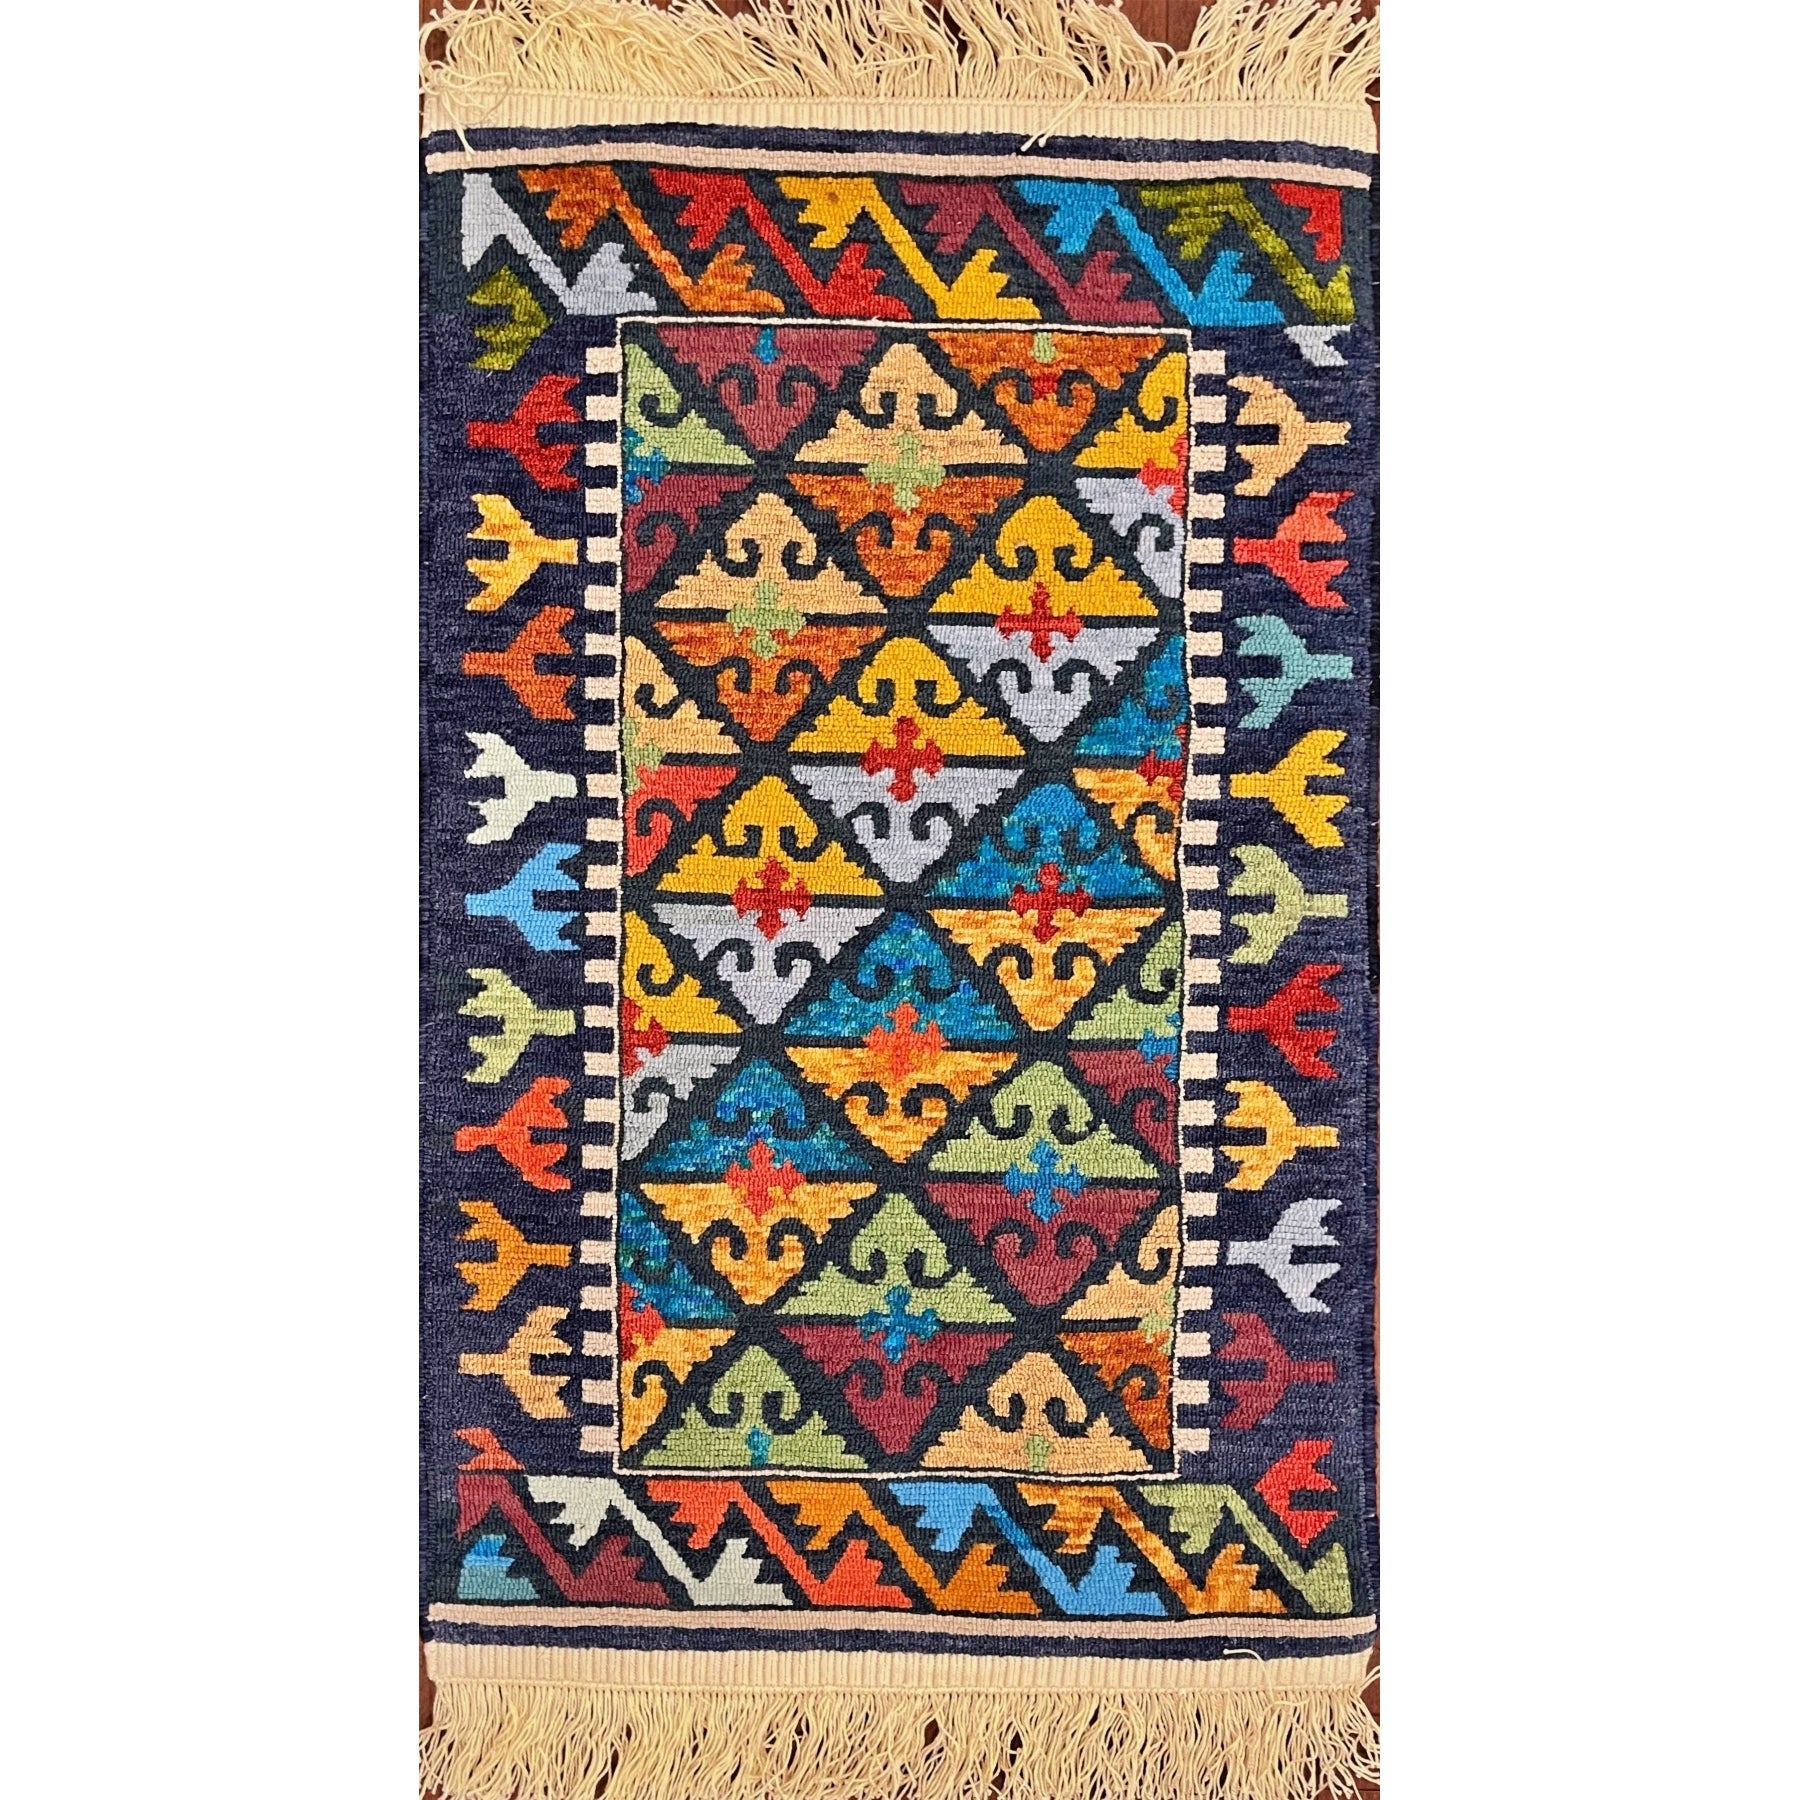 Cankiri, rug hooked by Jane McGown Flynn